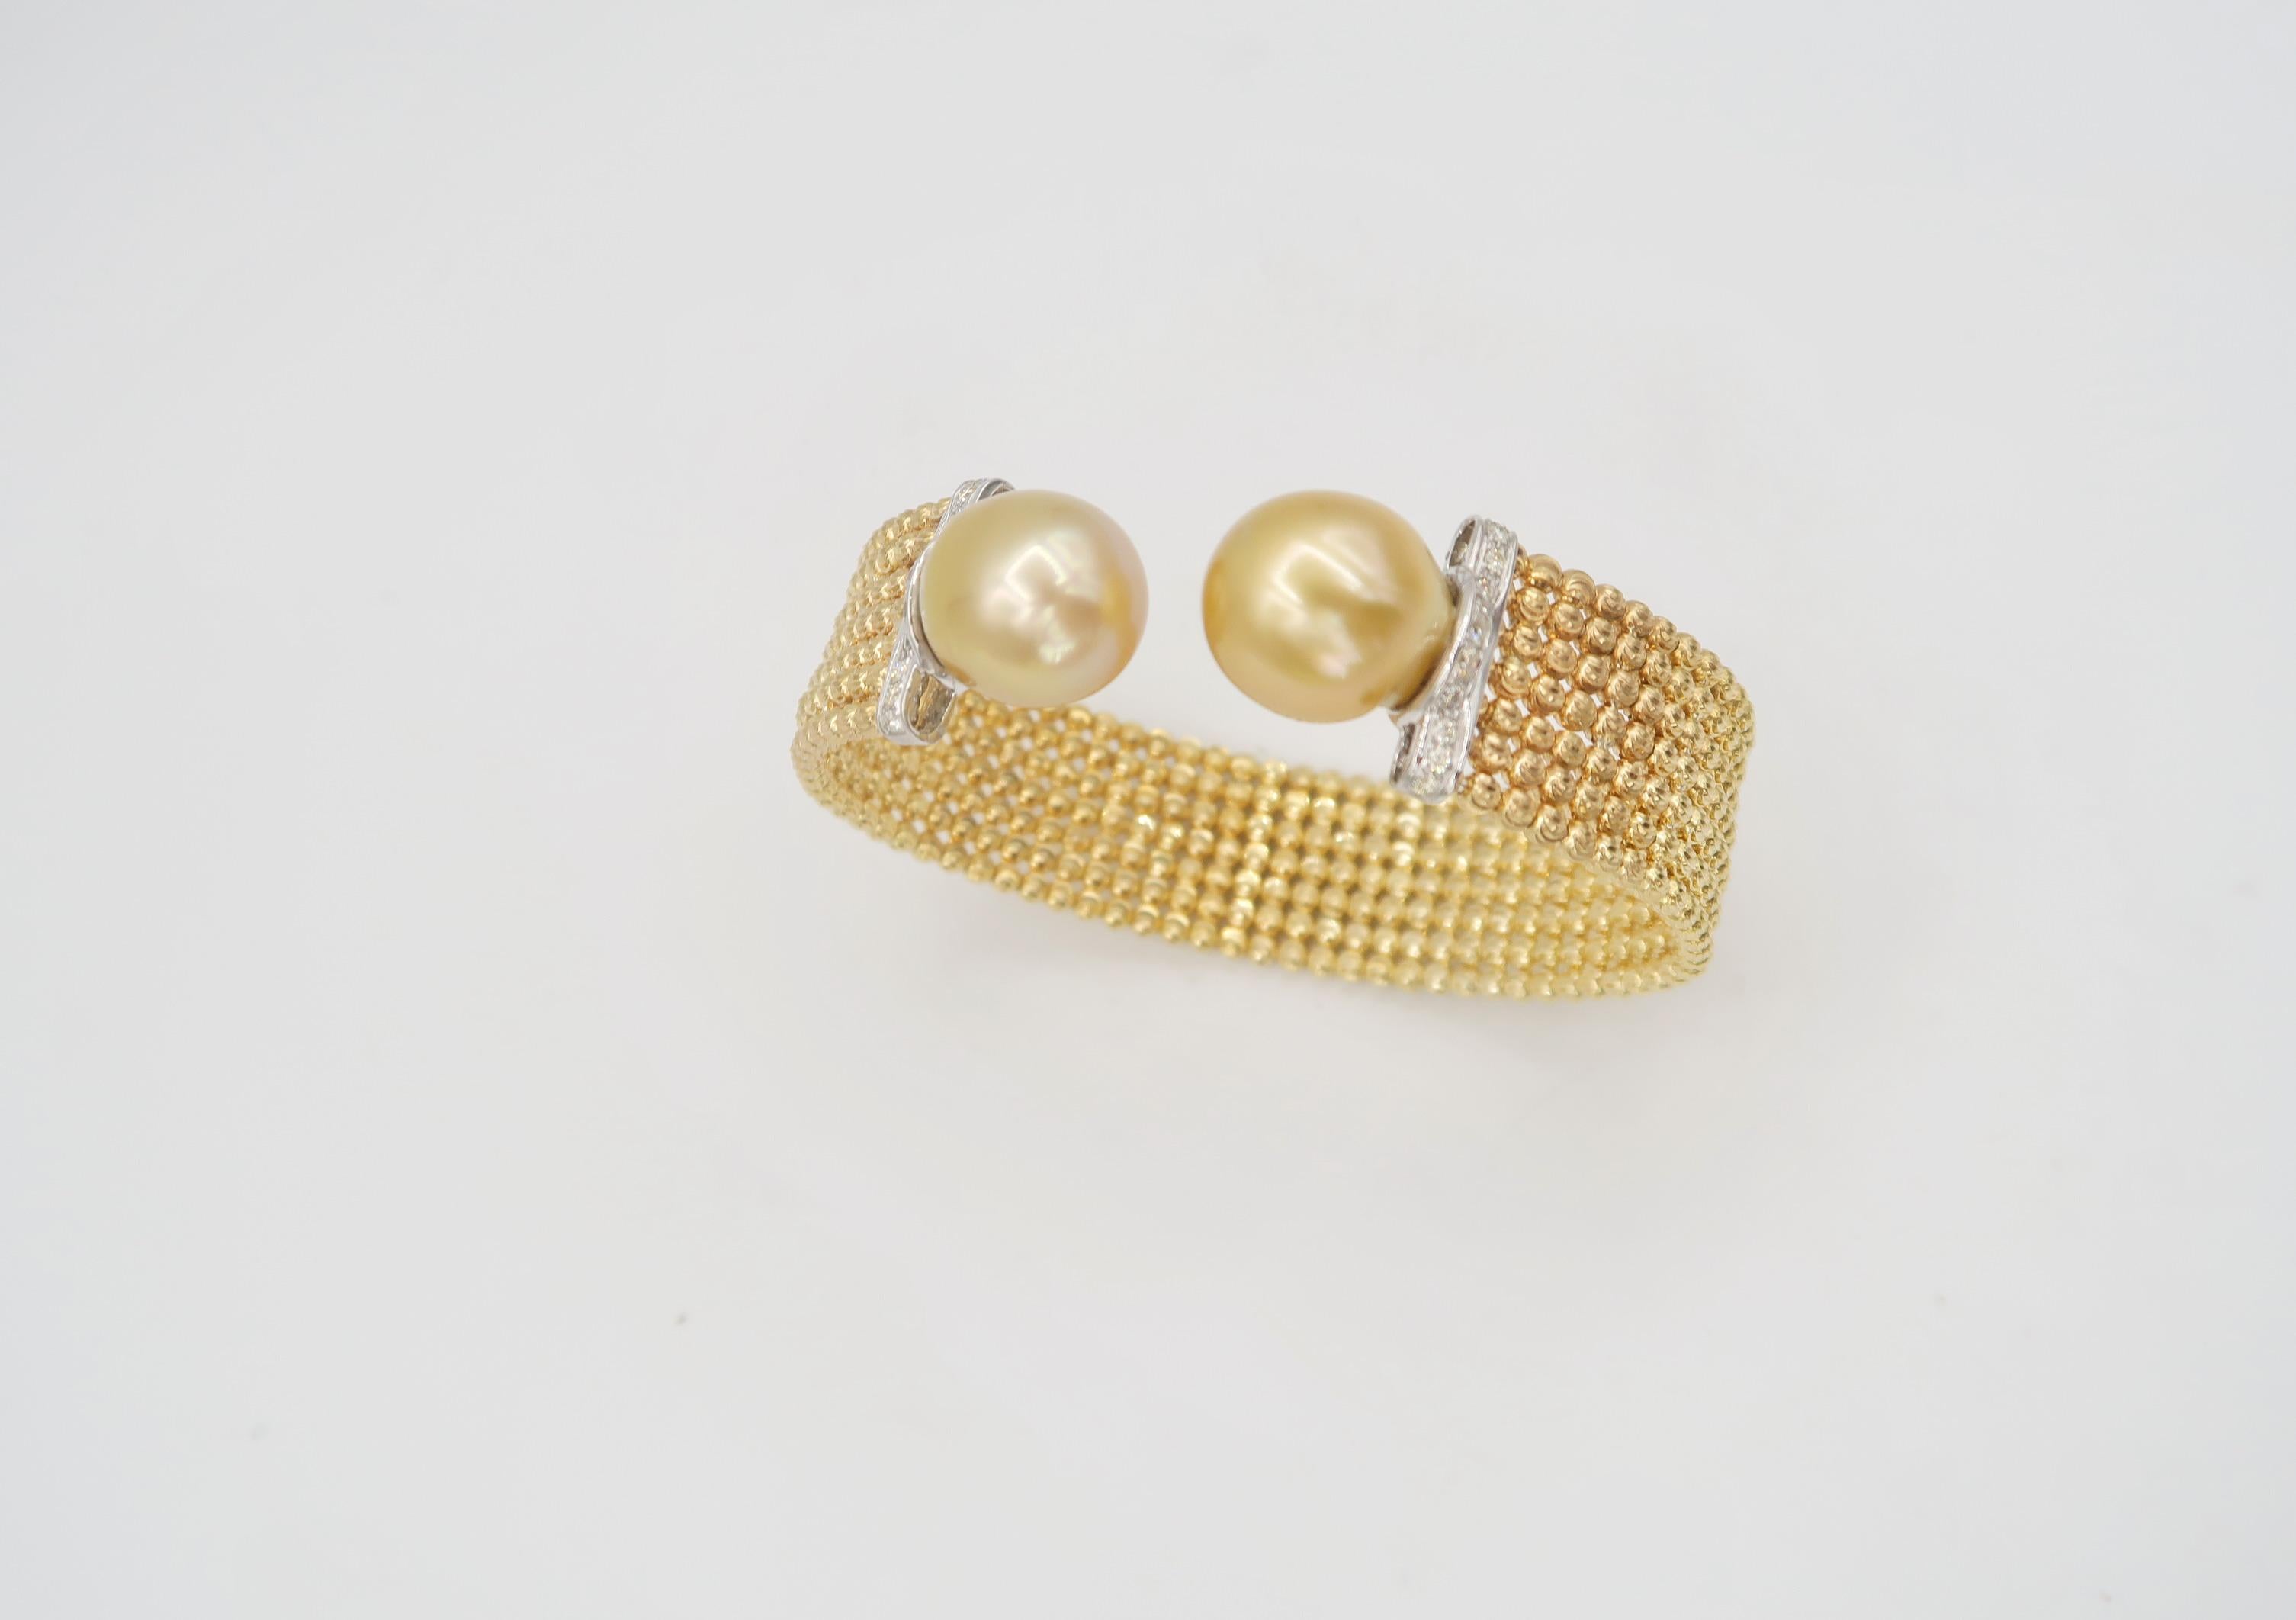 No Closure Easy-to-wear Spring Bracelet in 18K Gold with Diamonds and Gold South Sea Pearls

Gold: 18K White Gold 33.69g.
Diamond: 0.40ct.
Pearls: 2 South Sea Pearls 